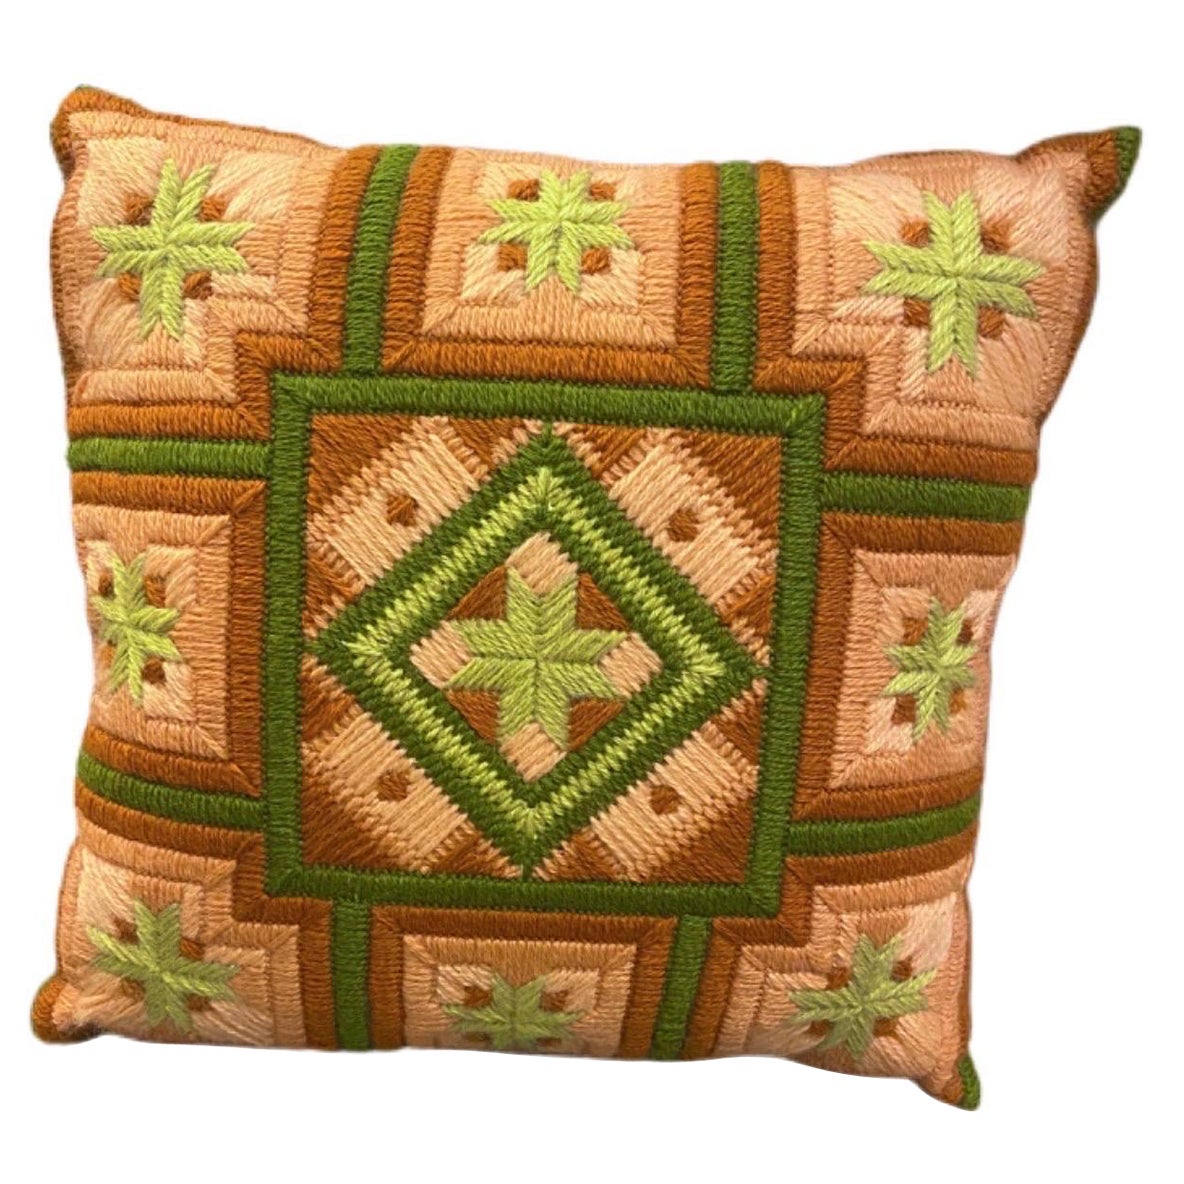 Vintage Stitching Pink, Green, and Umber Geometric Pillow